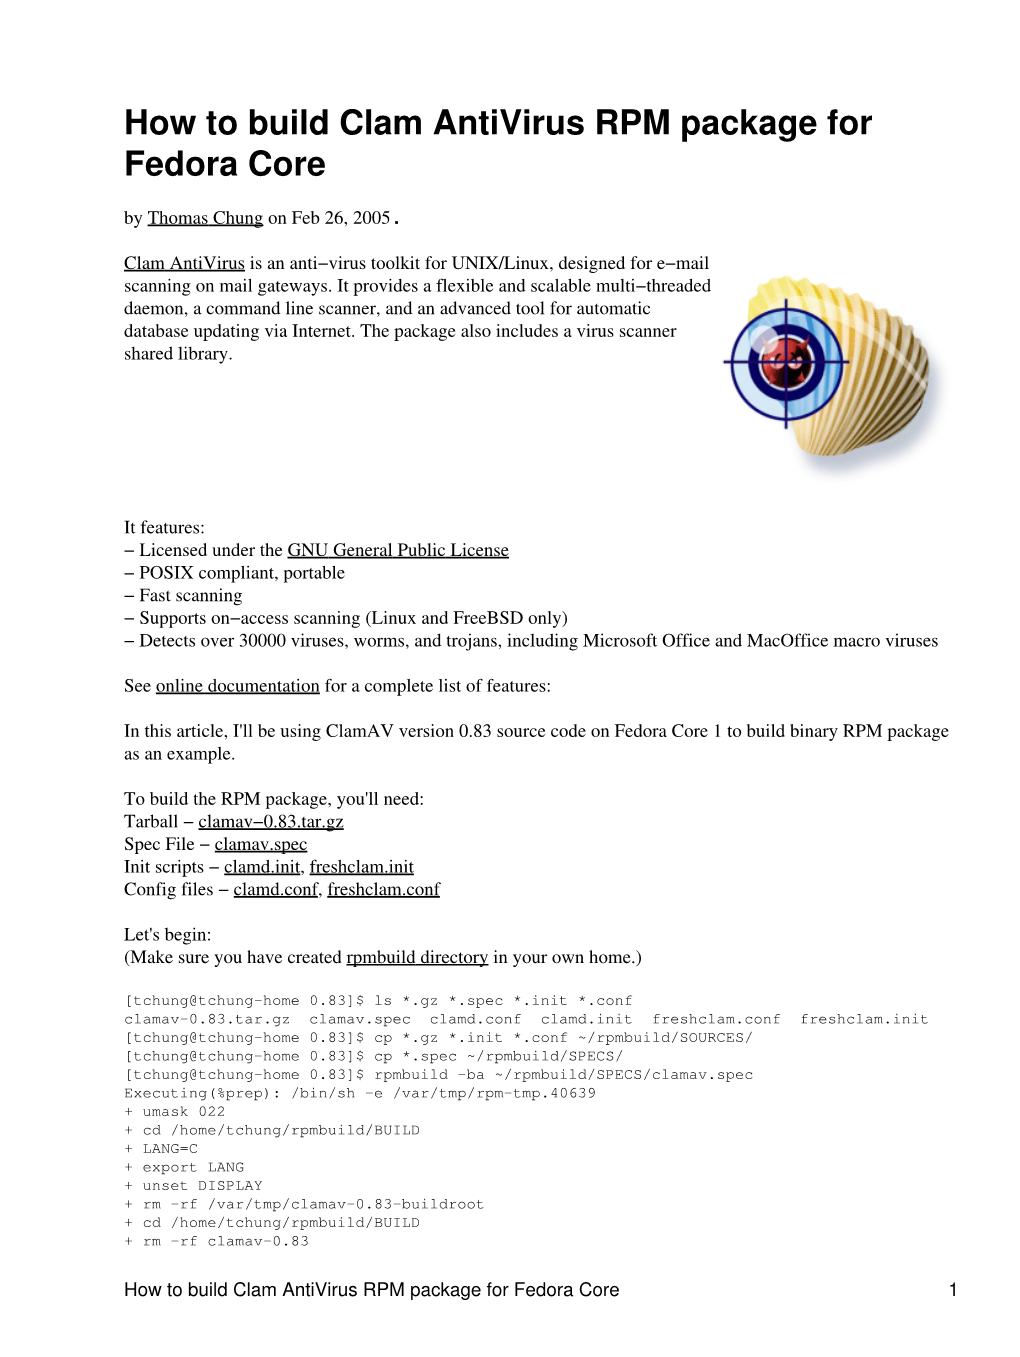 How to Build Clam Antivirus RPM Package for Fedora Core by Thomas Chung on Feb 26, 2005